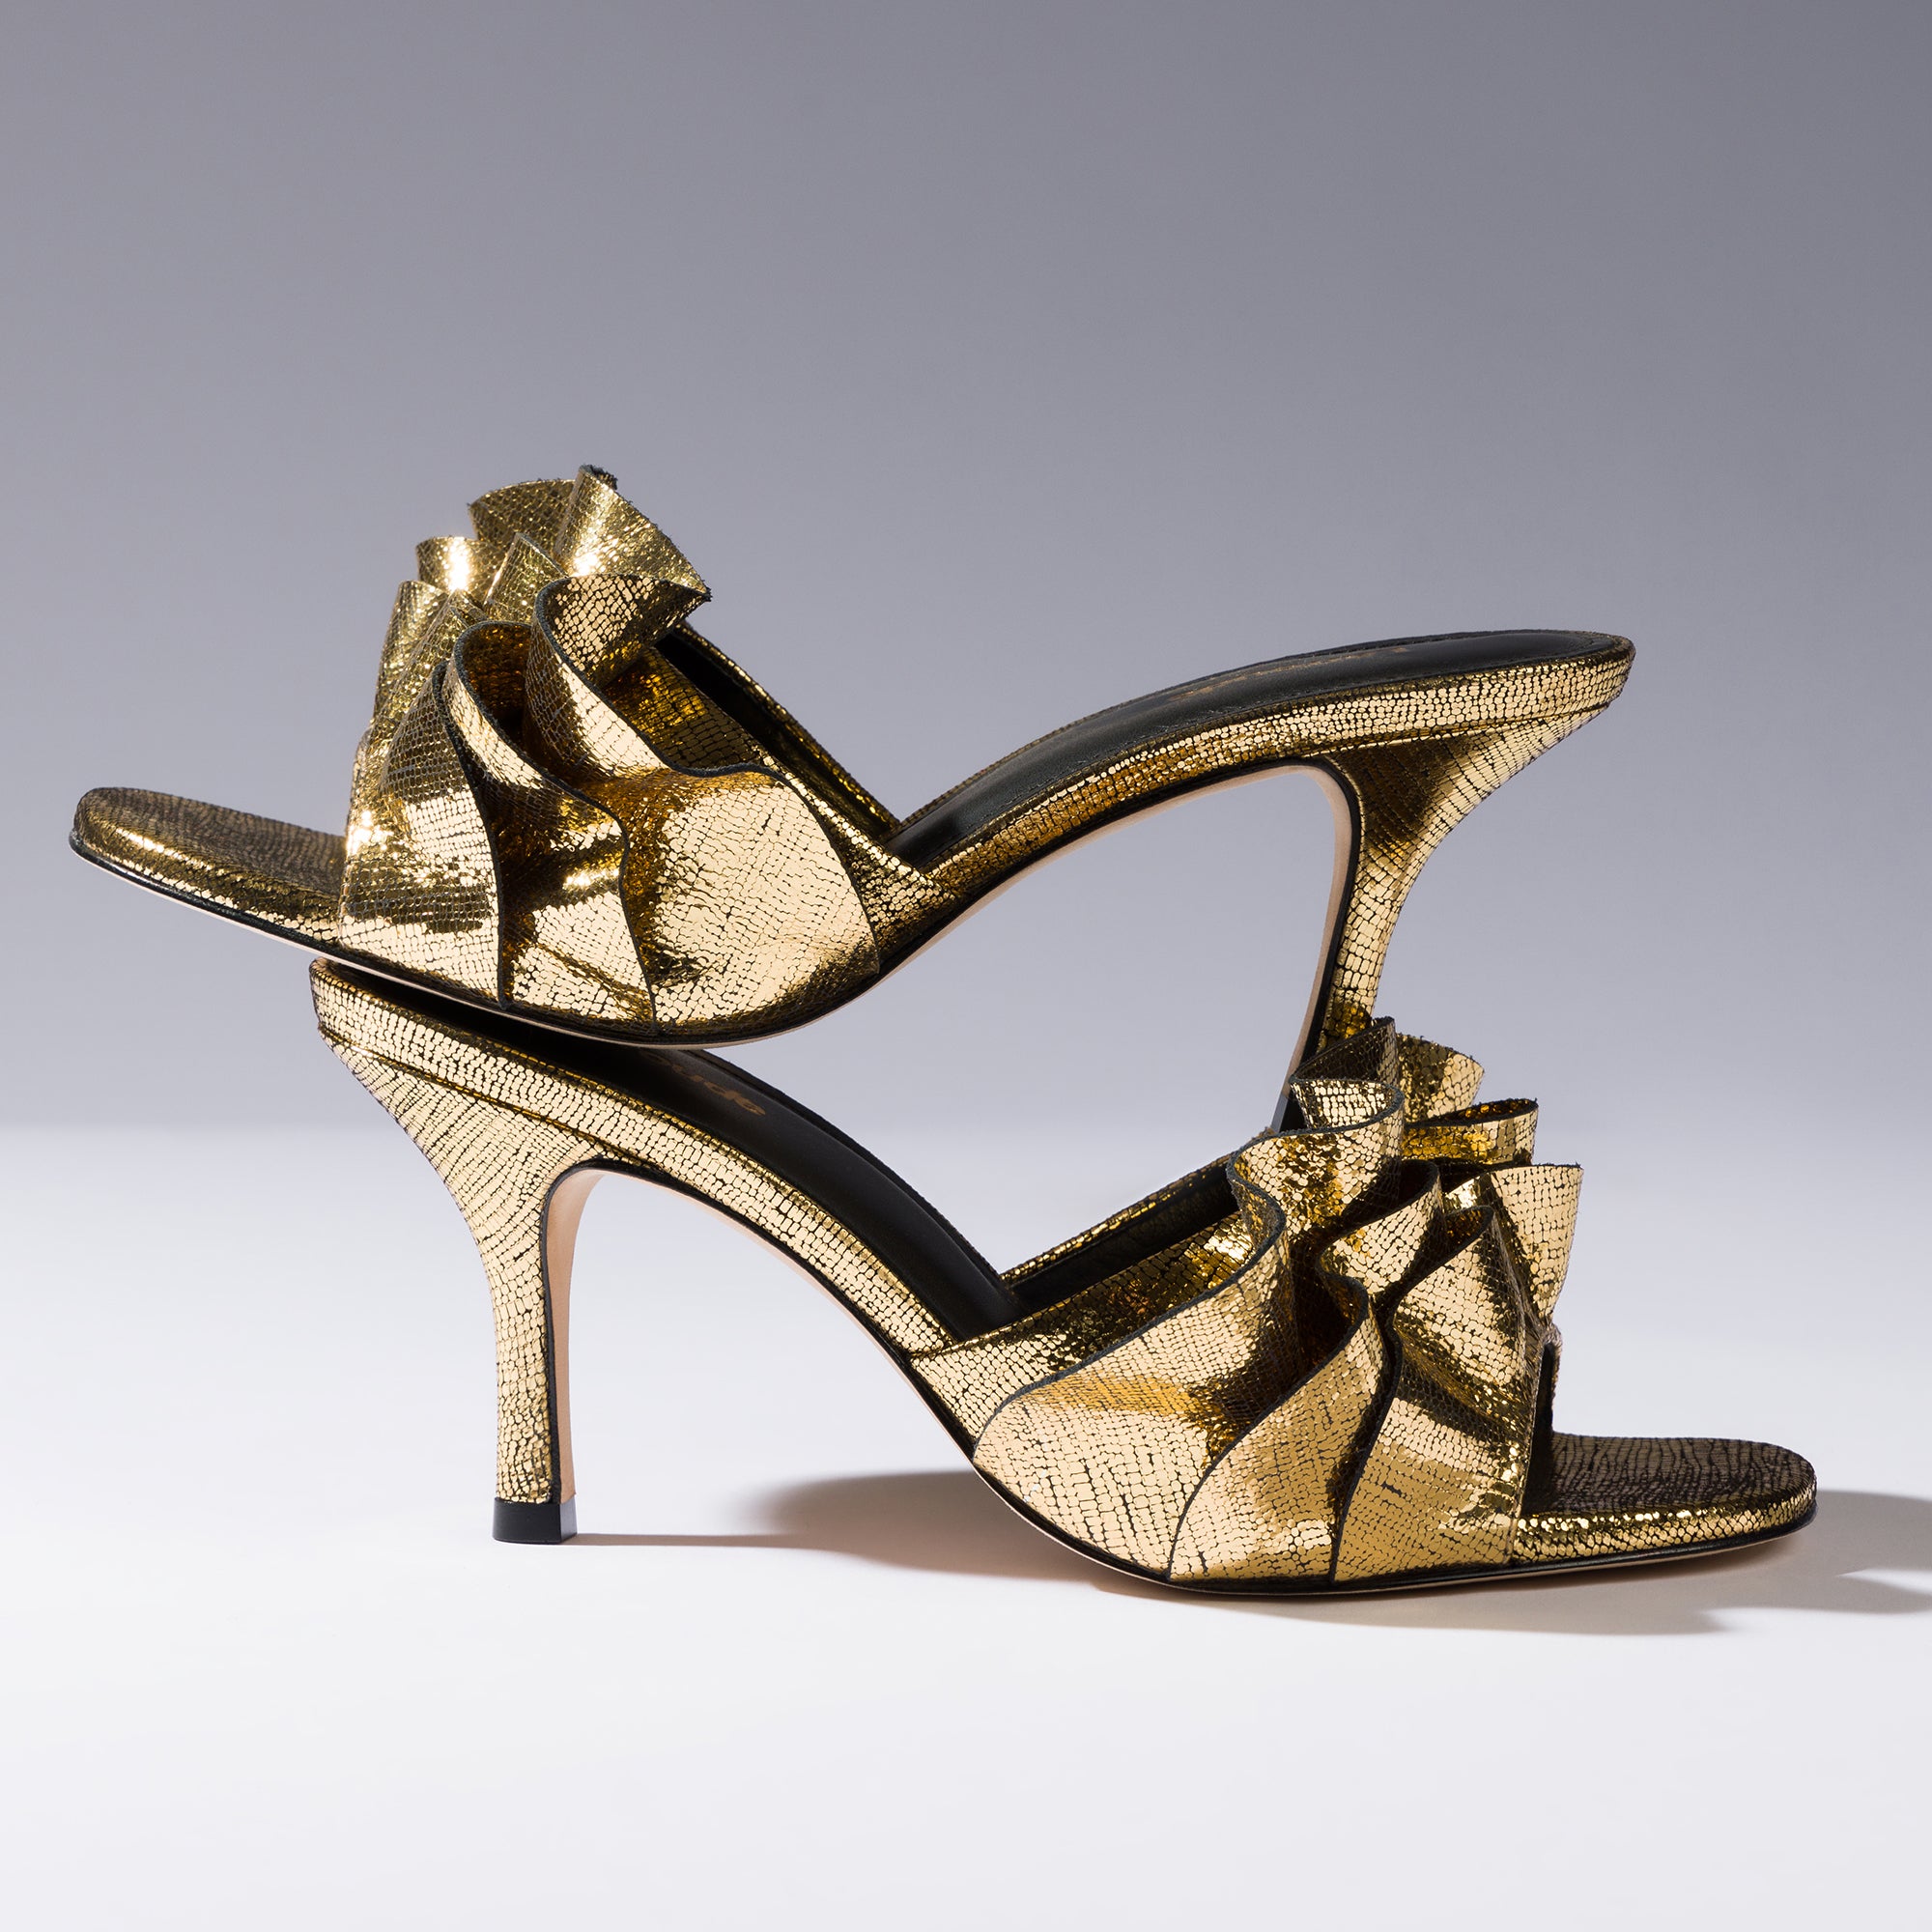 Colette Ruffle Mule In Gold Cracked Metallic Leather